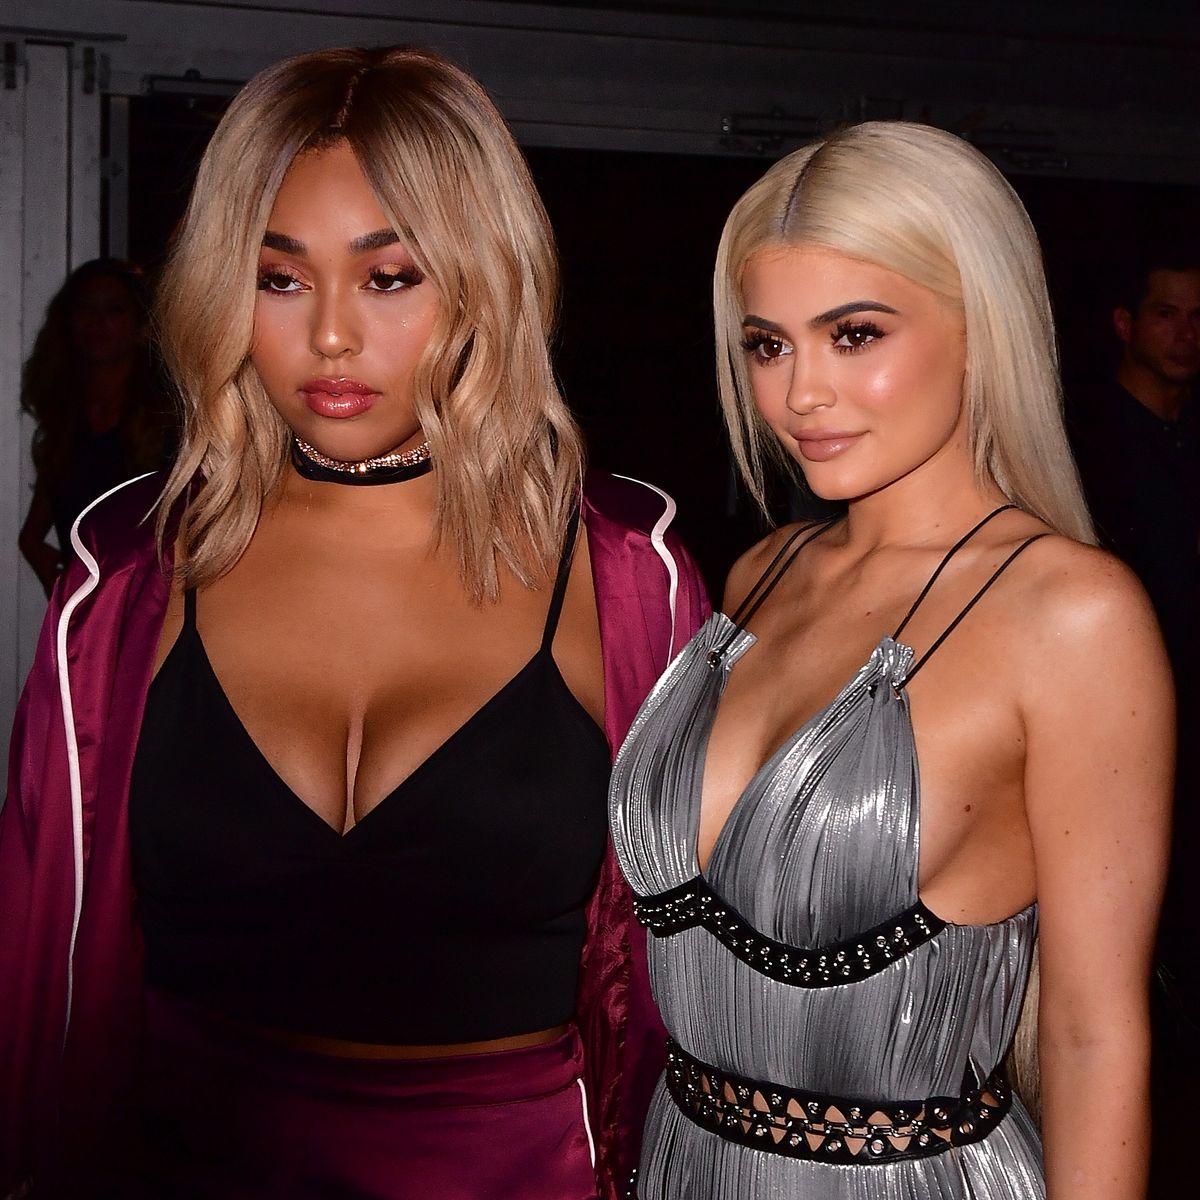 Jordyn Woods sends message with choker necklace at dinner with Kylie Jenner